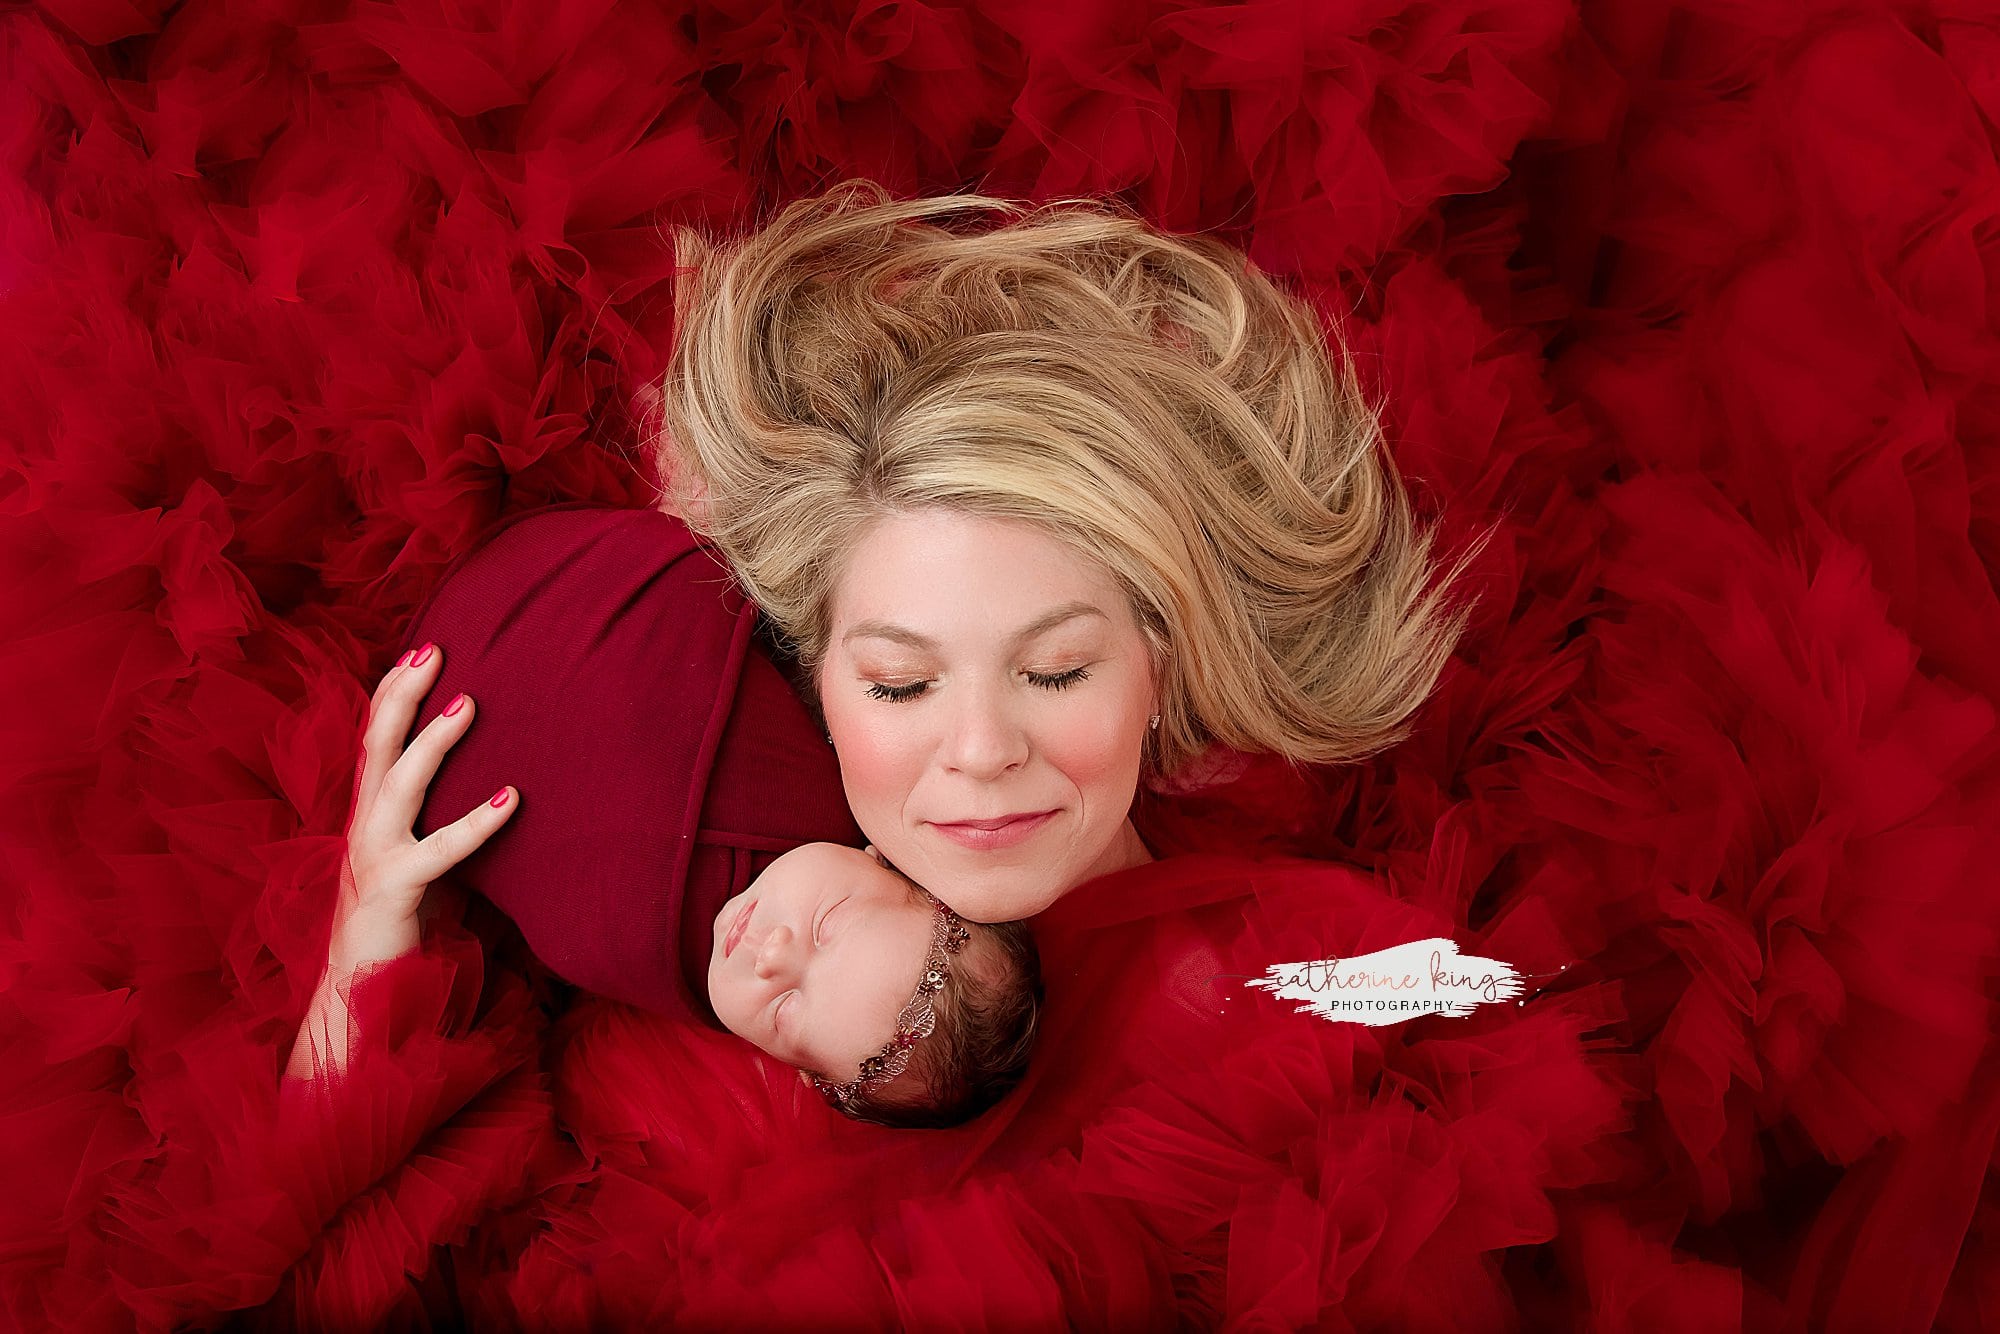 Tips to prepare for a newborn photography session